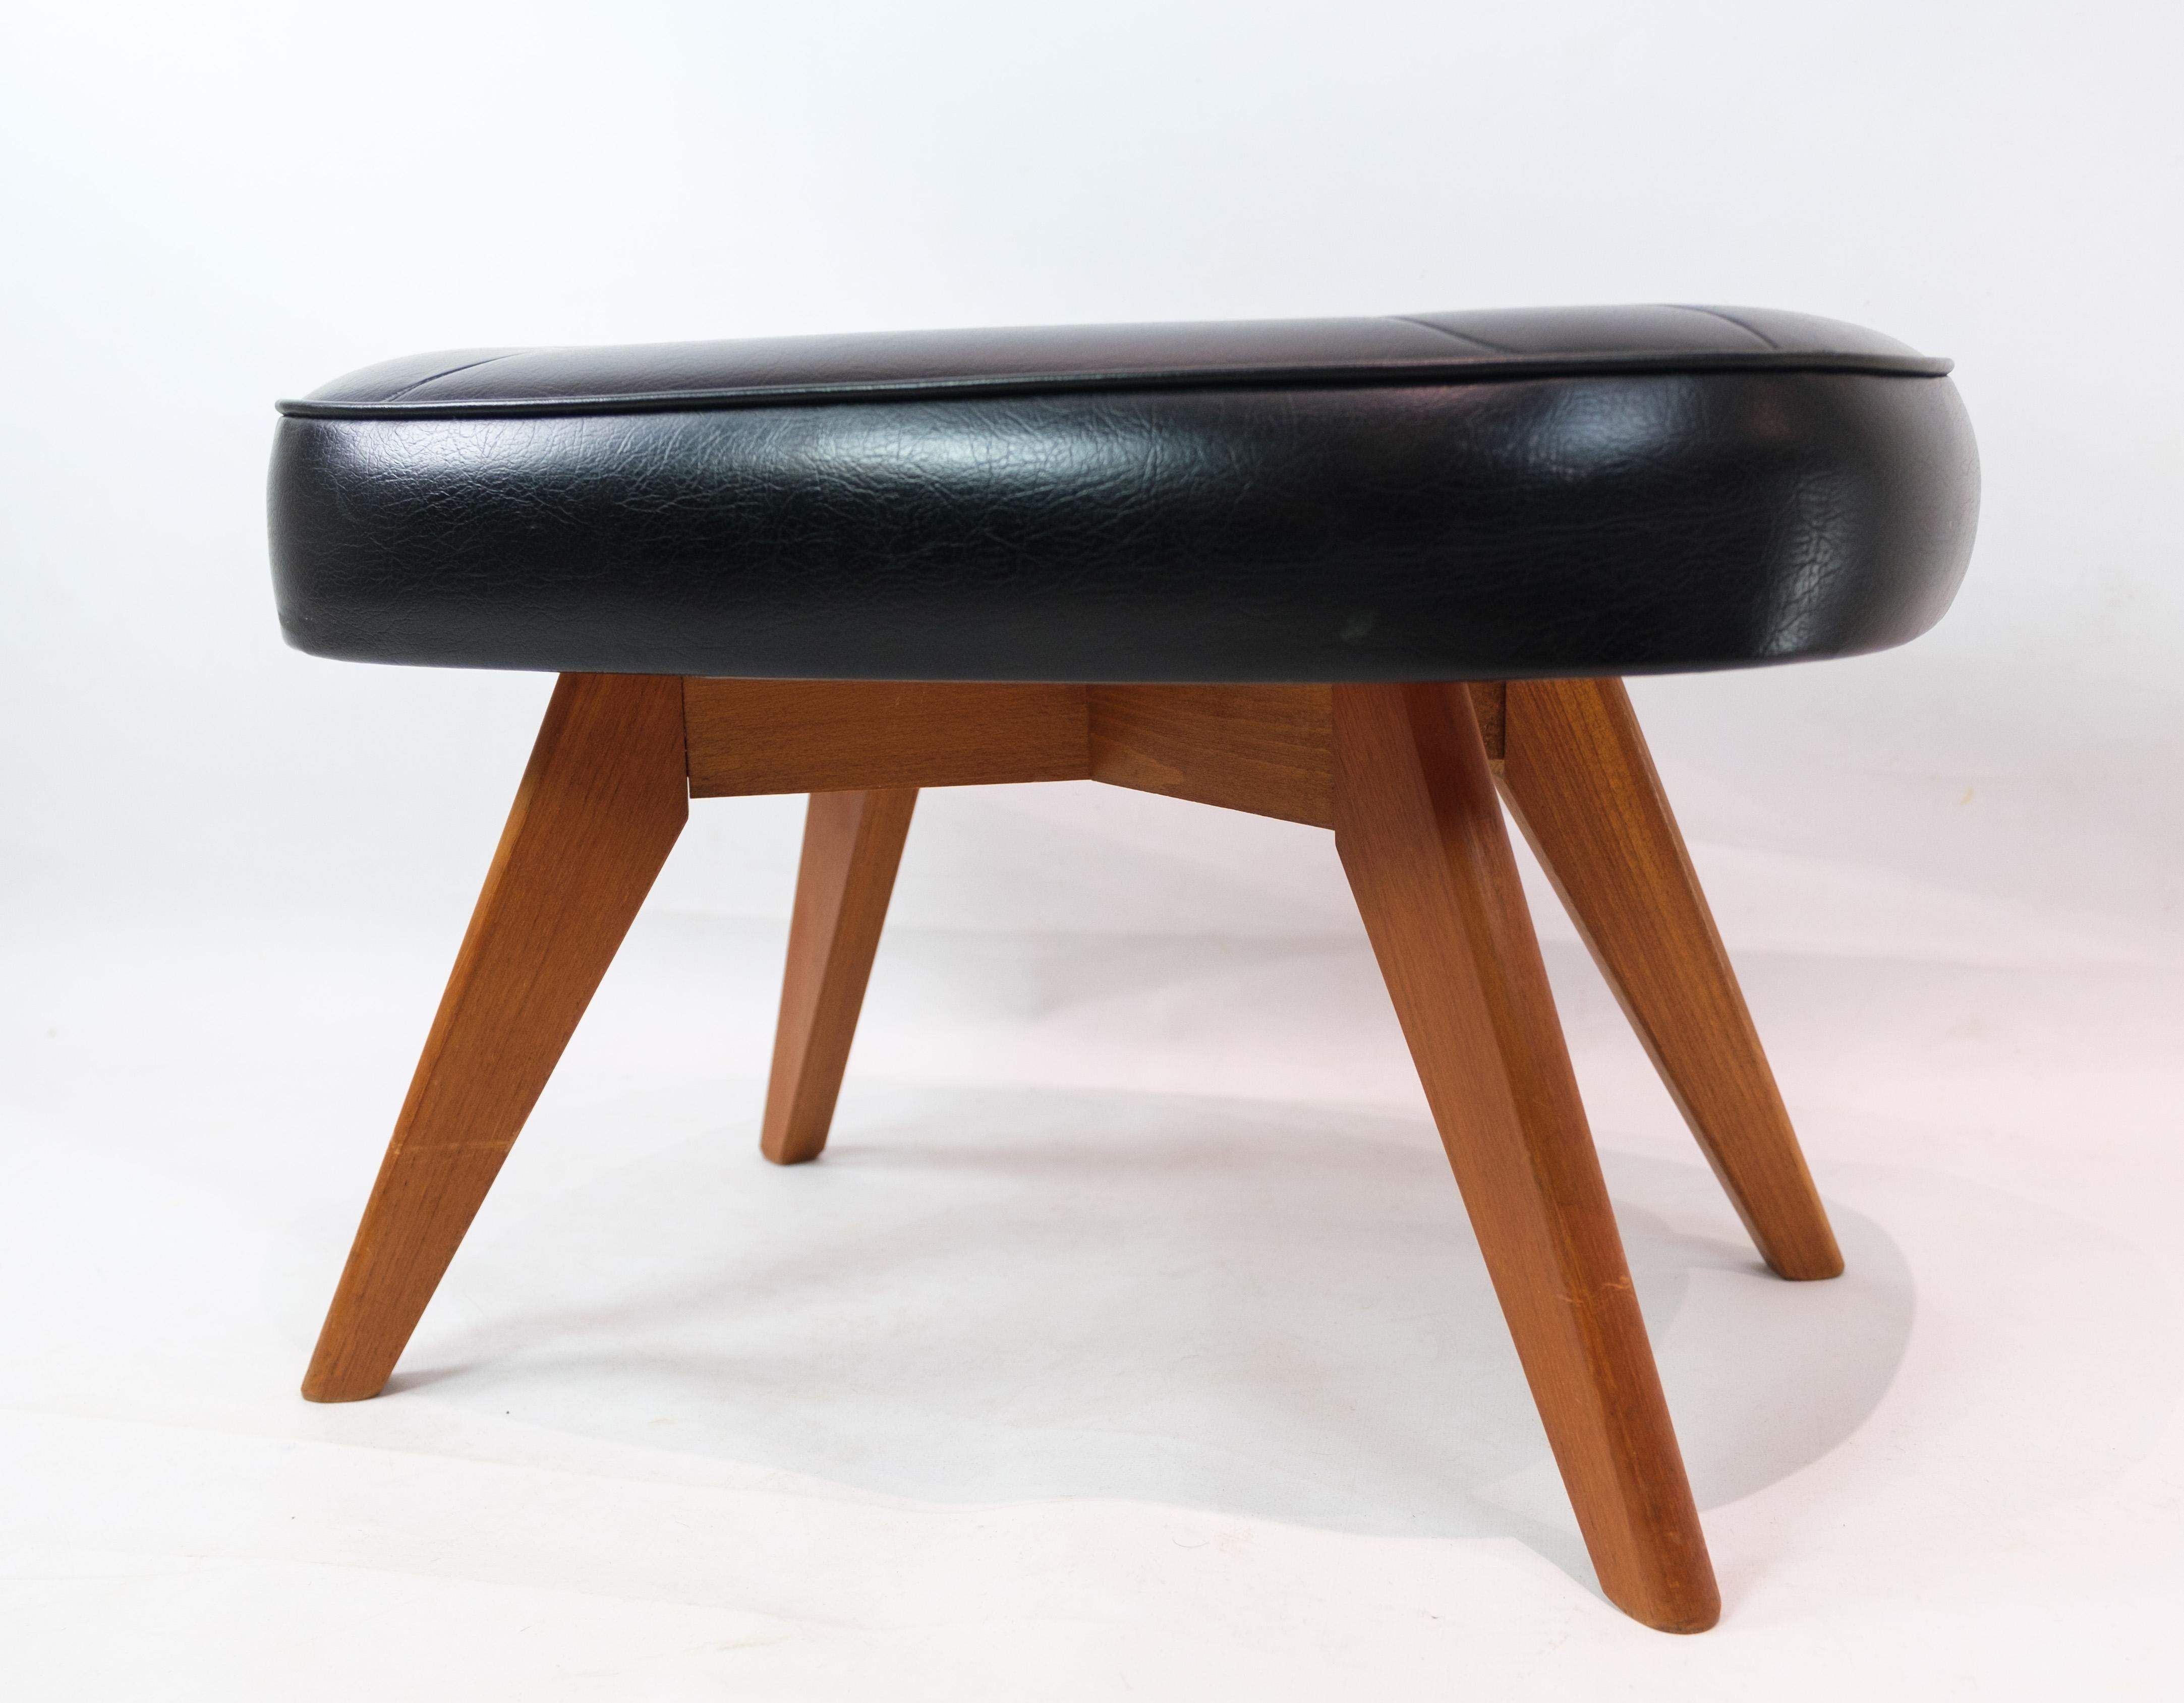 Stool of Danish design with black leather and teak legs from around the 1960s. The stool has 4 buttons, all of which are intact.
Dimensions in cm: H:35 W:56 D:40

This product will be inspected thoroughly at our professional workshop by our